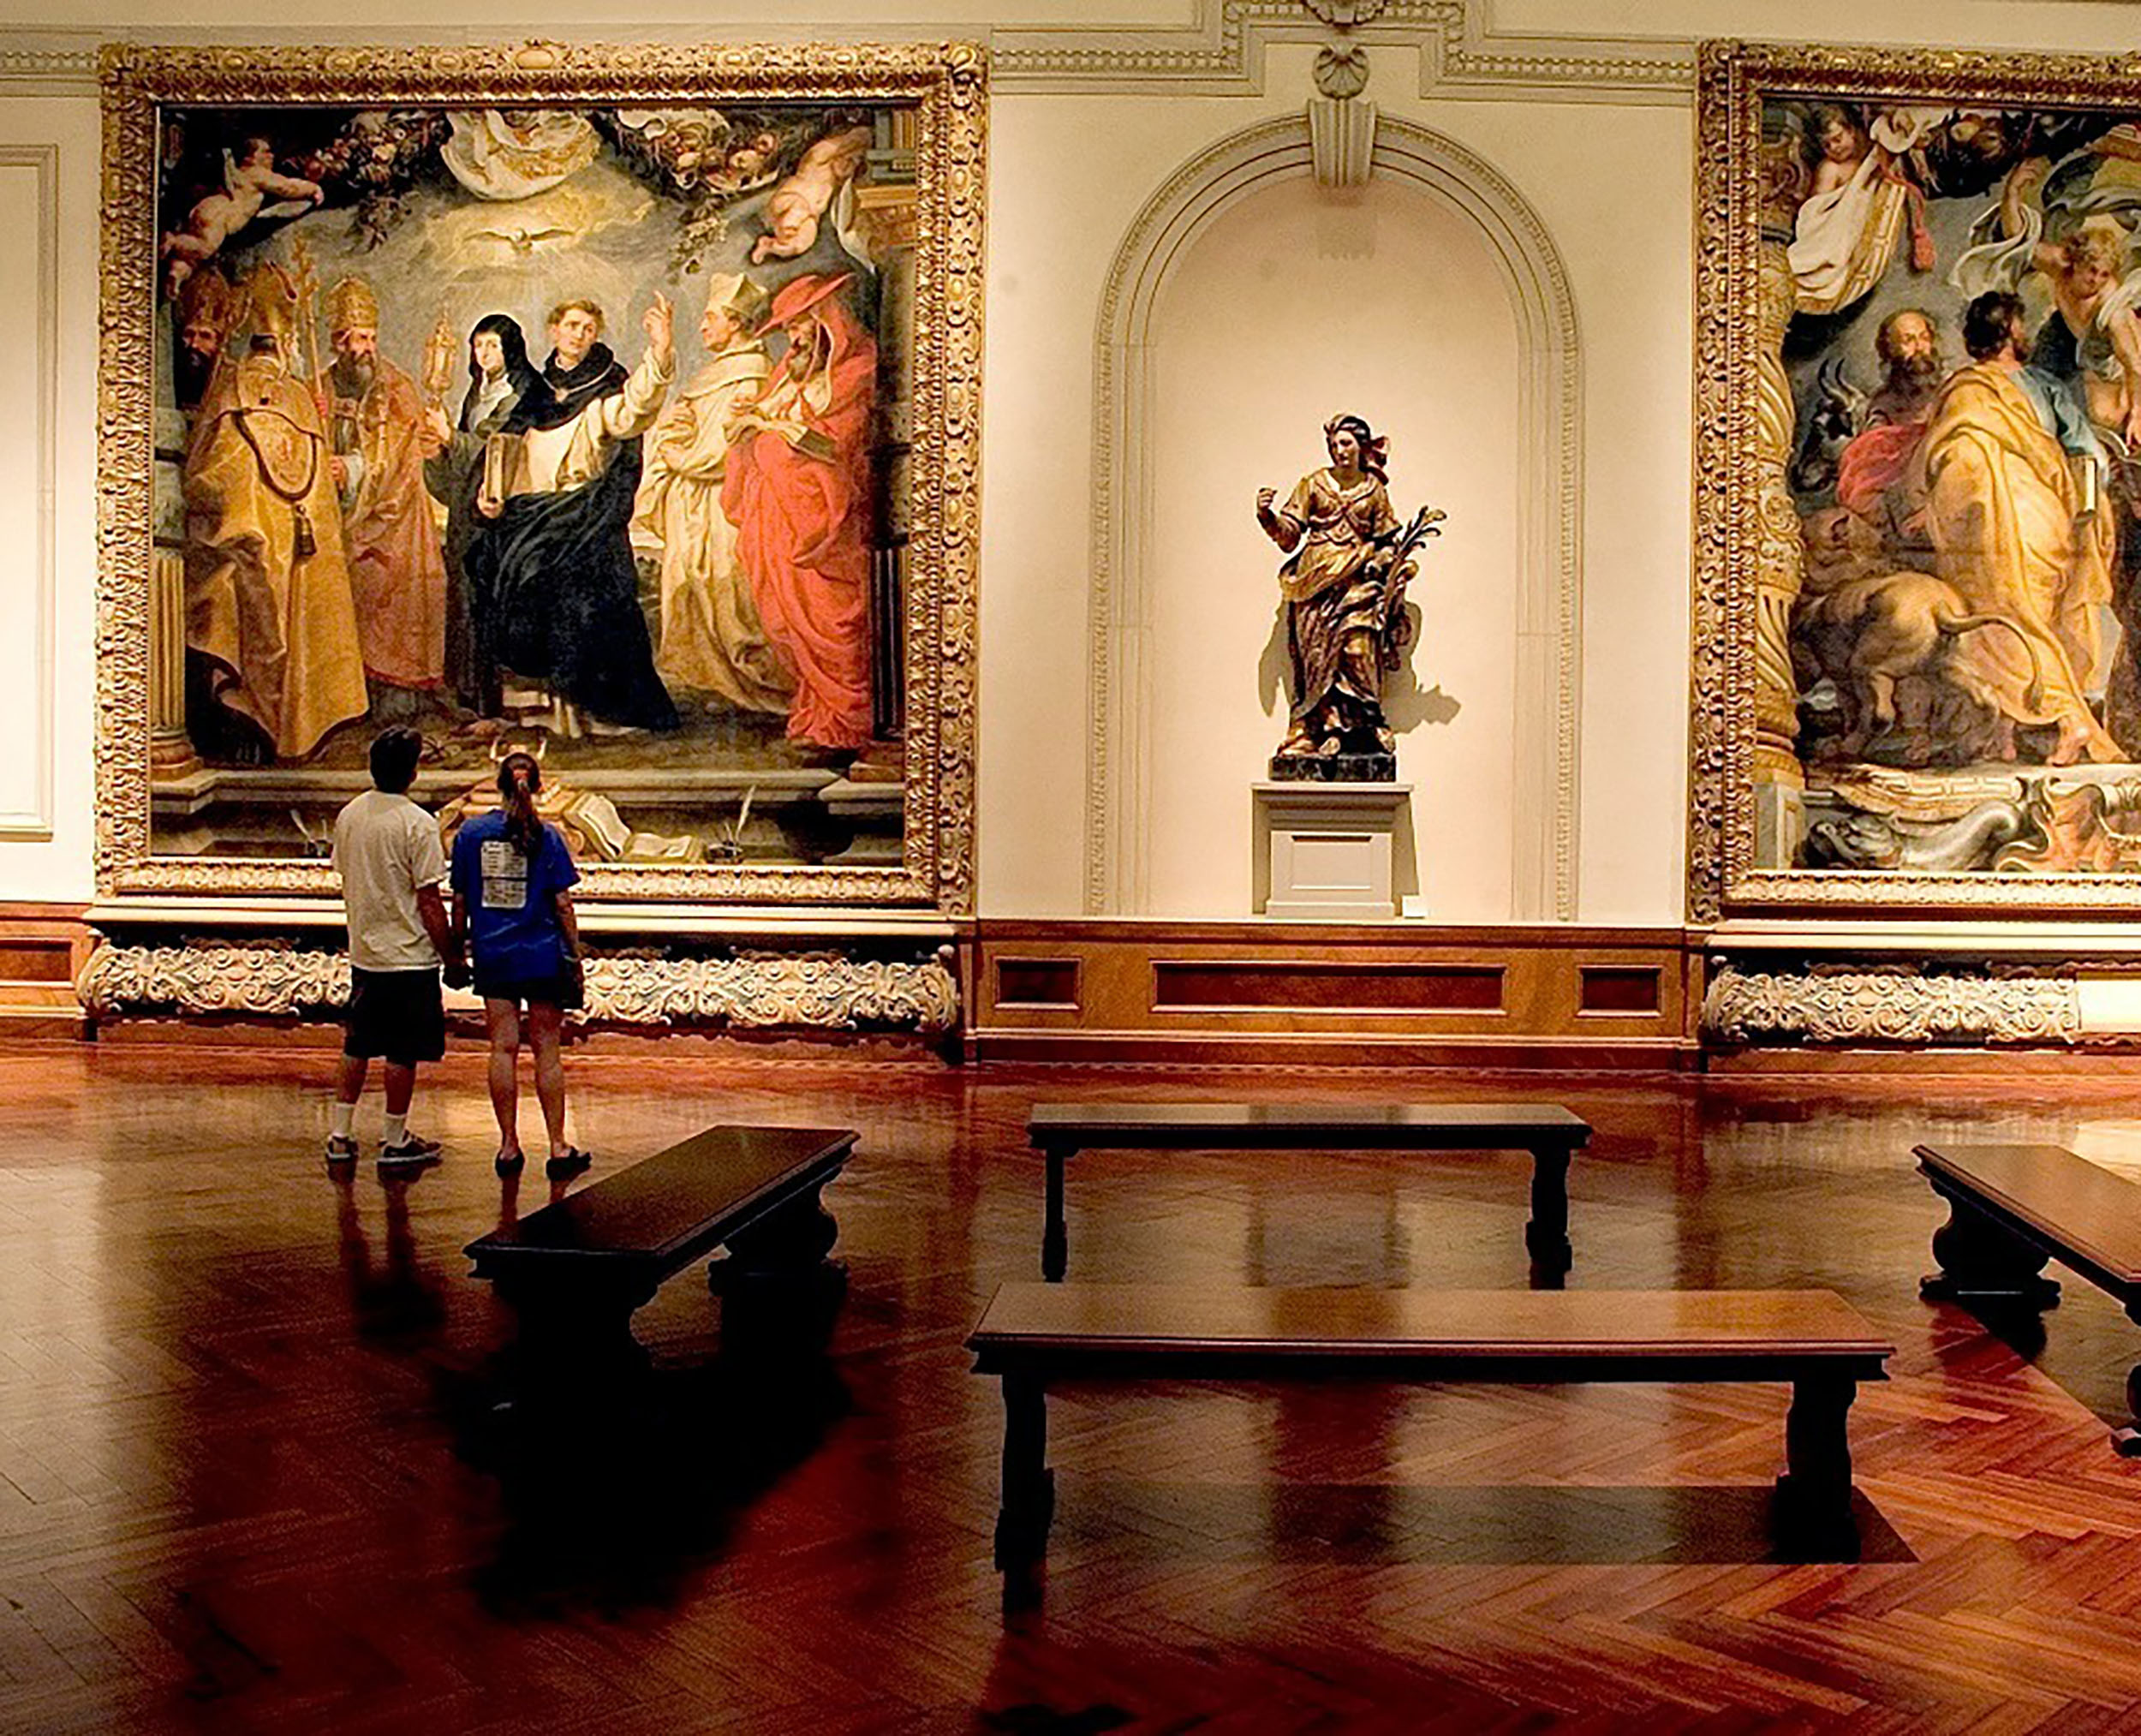 People view large religious renaissance paintings at the Ringling Art Gallery.